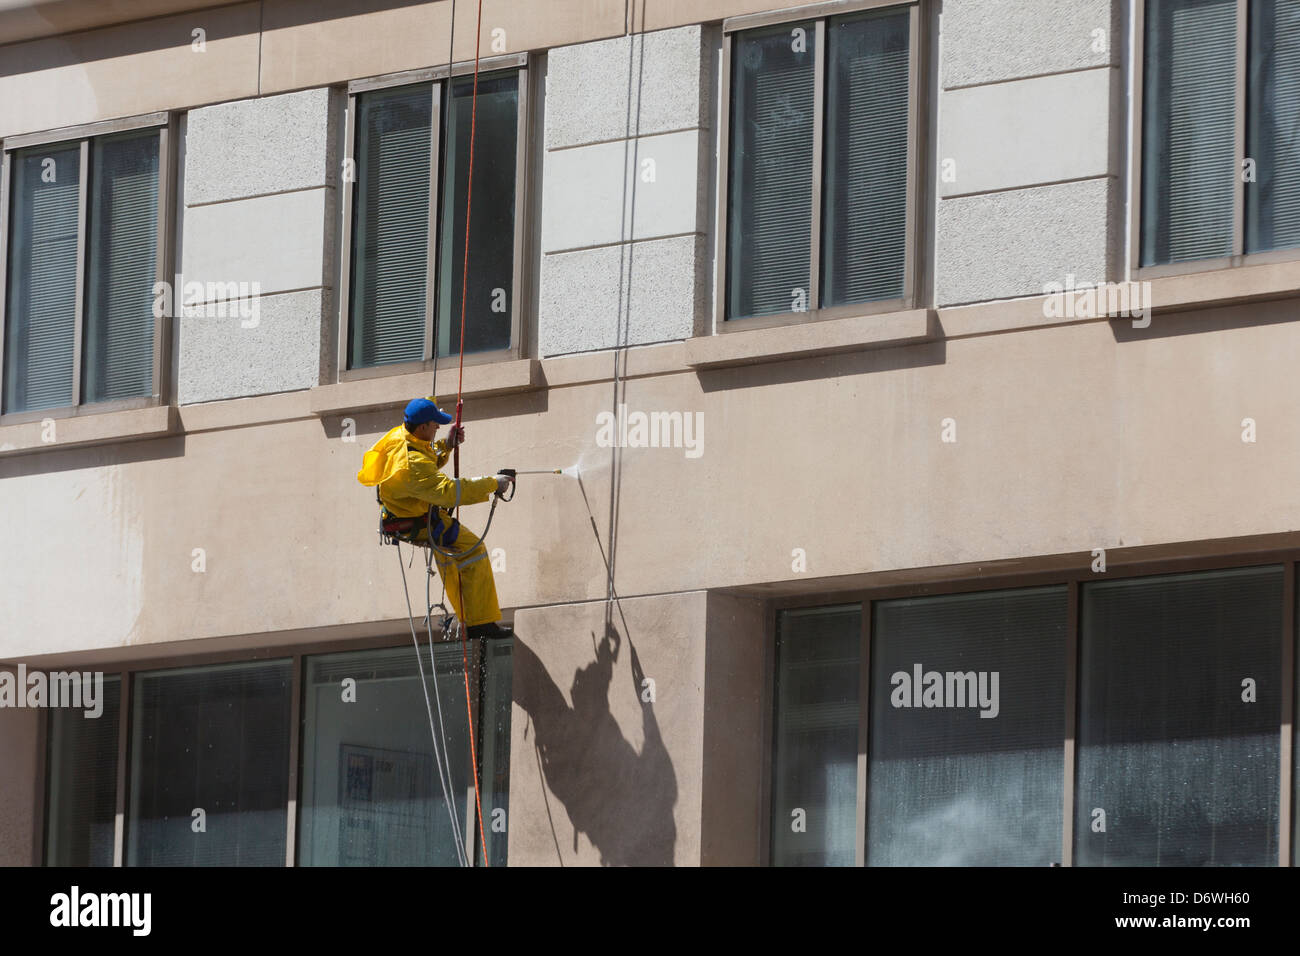 Man cleaning building with pressure washer Stock Photo